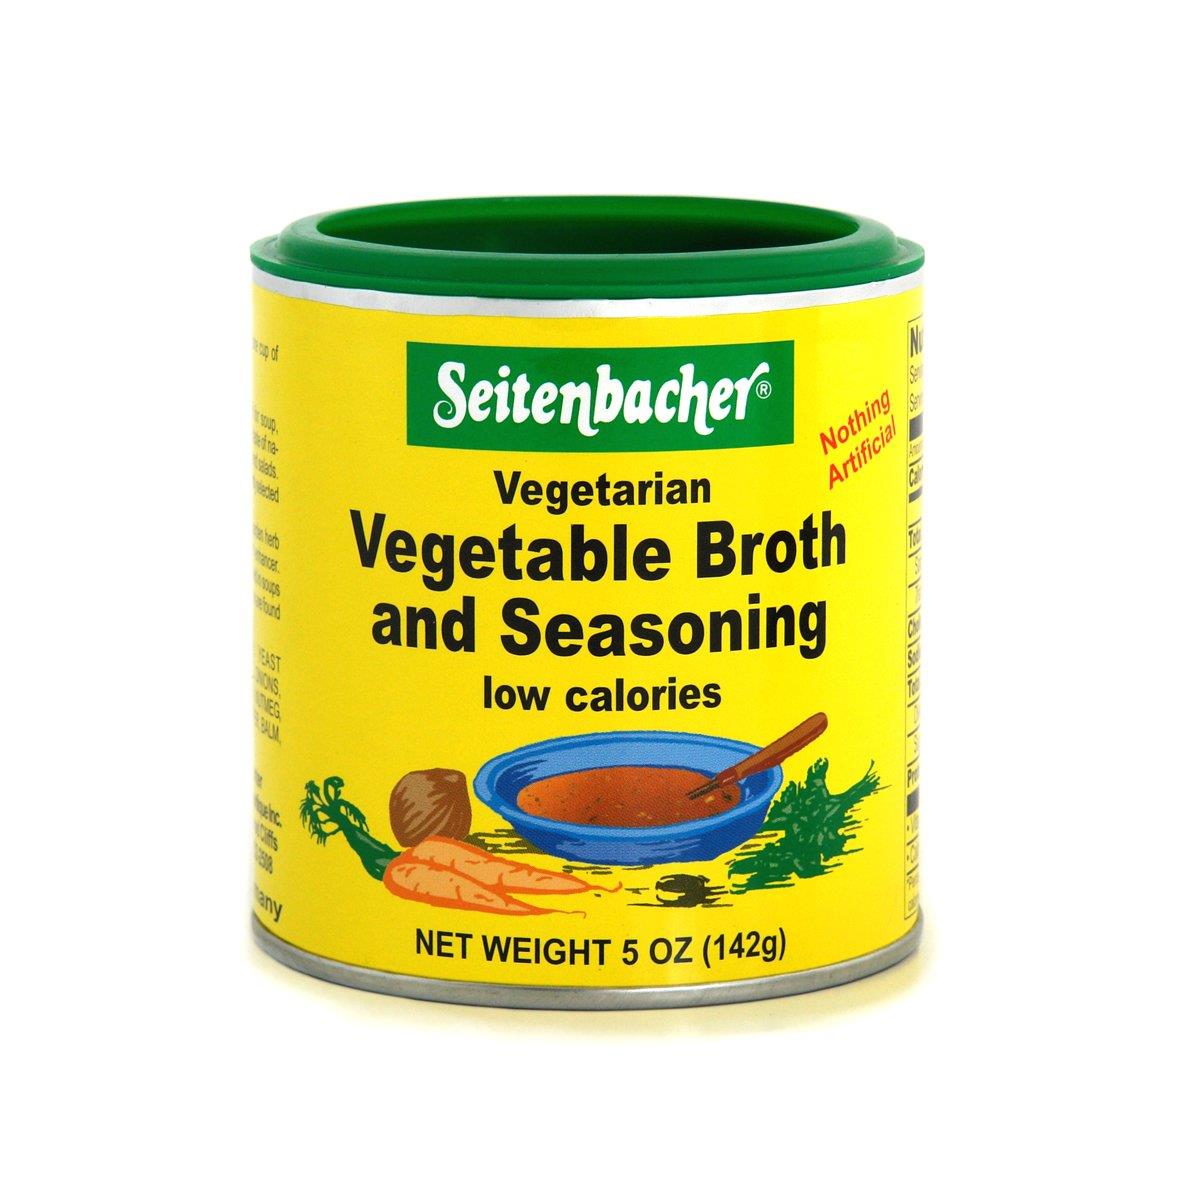 Seitenbacher Vegetable Broth and Seasoning - 5 oz. can (2-Pack)